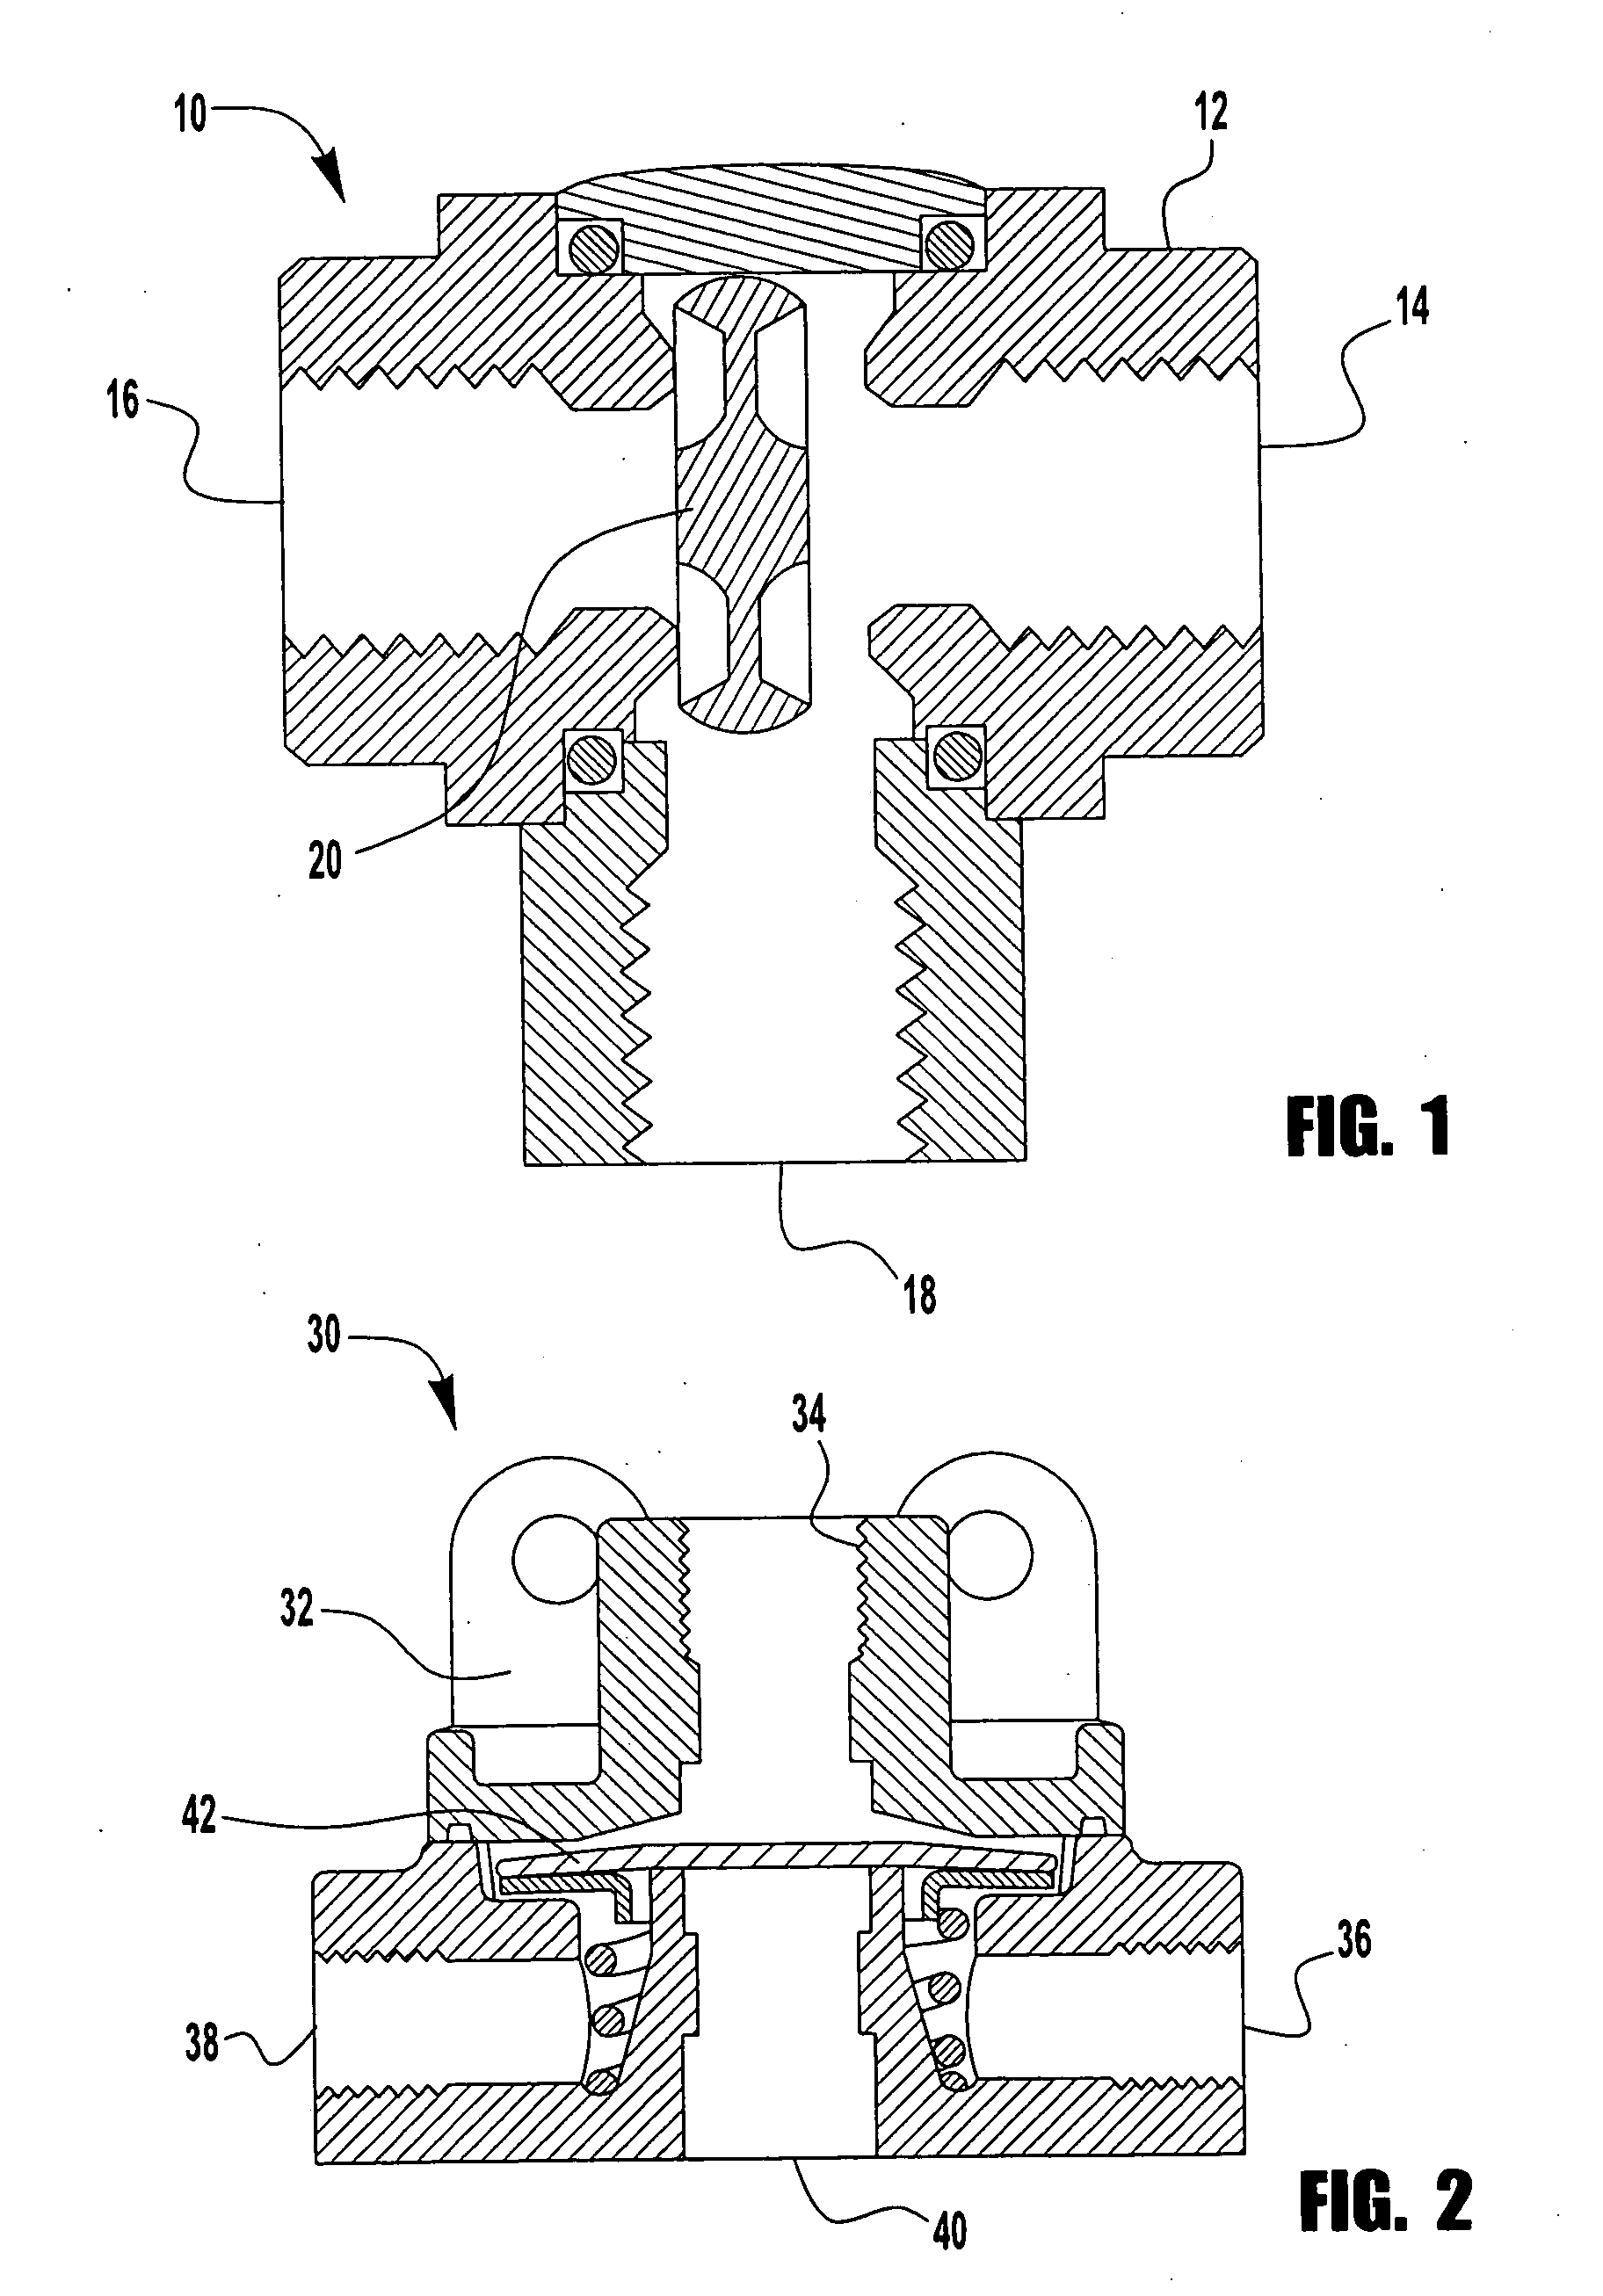 Optimized brake release timing using a quick release valve